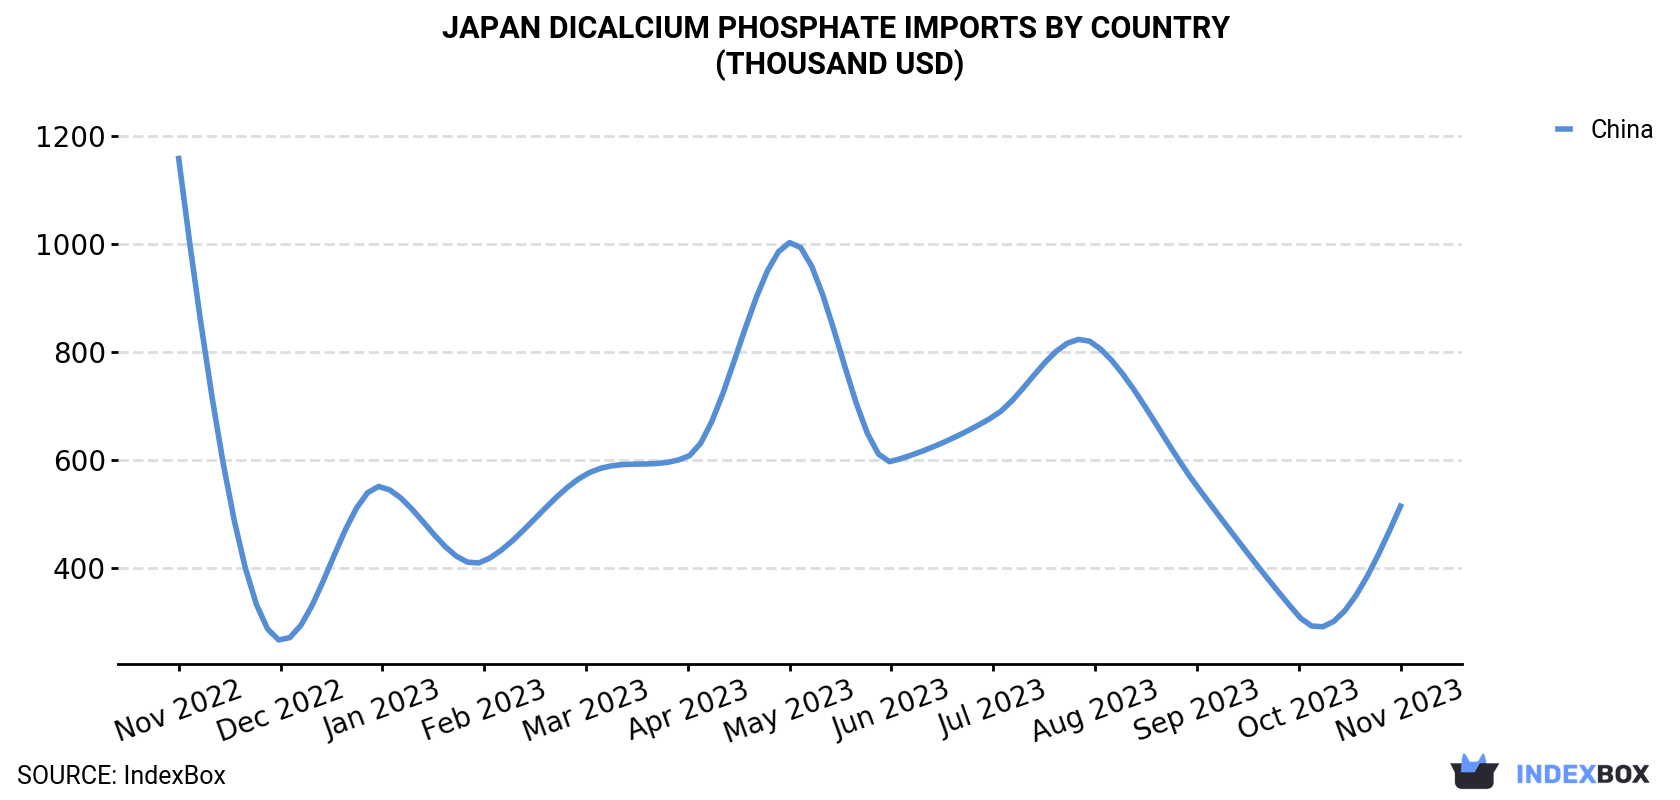 Japan Dicalcium Phosphate Imports By Country (Thousand USD)